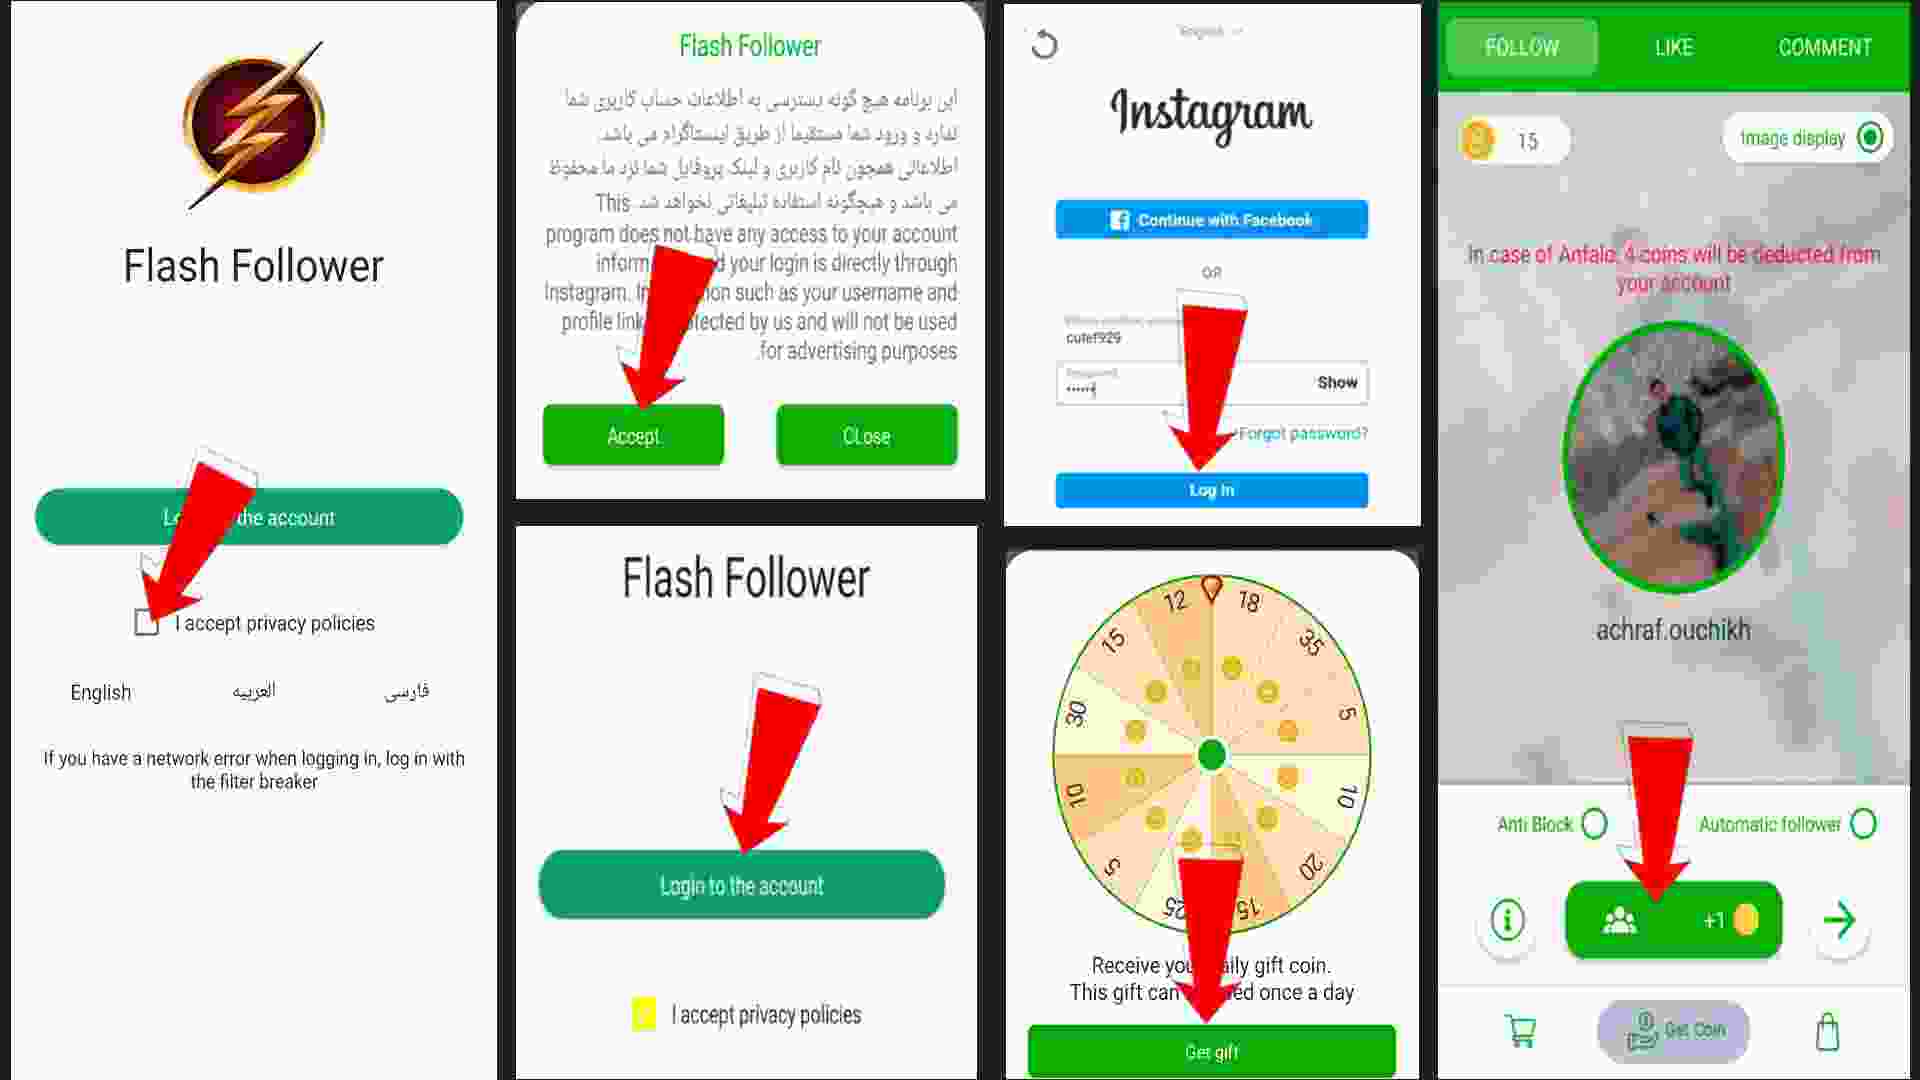 Flash Follower Apk- How To Get Instagram Followers And Likes